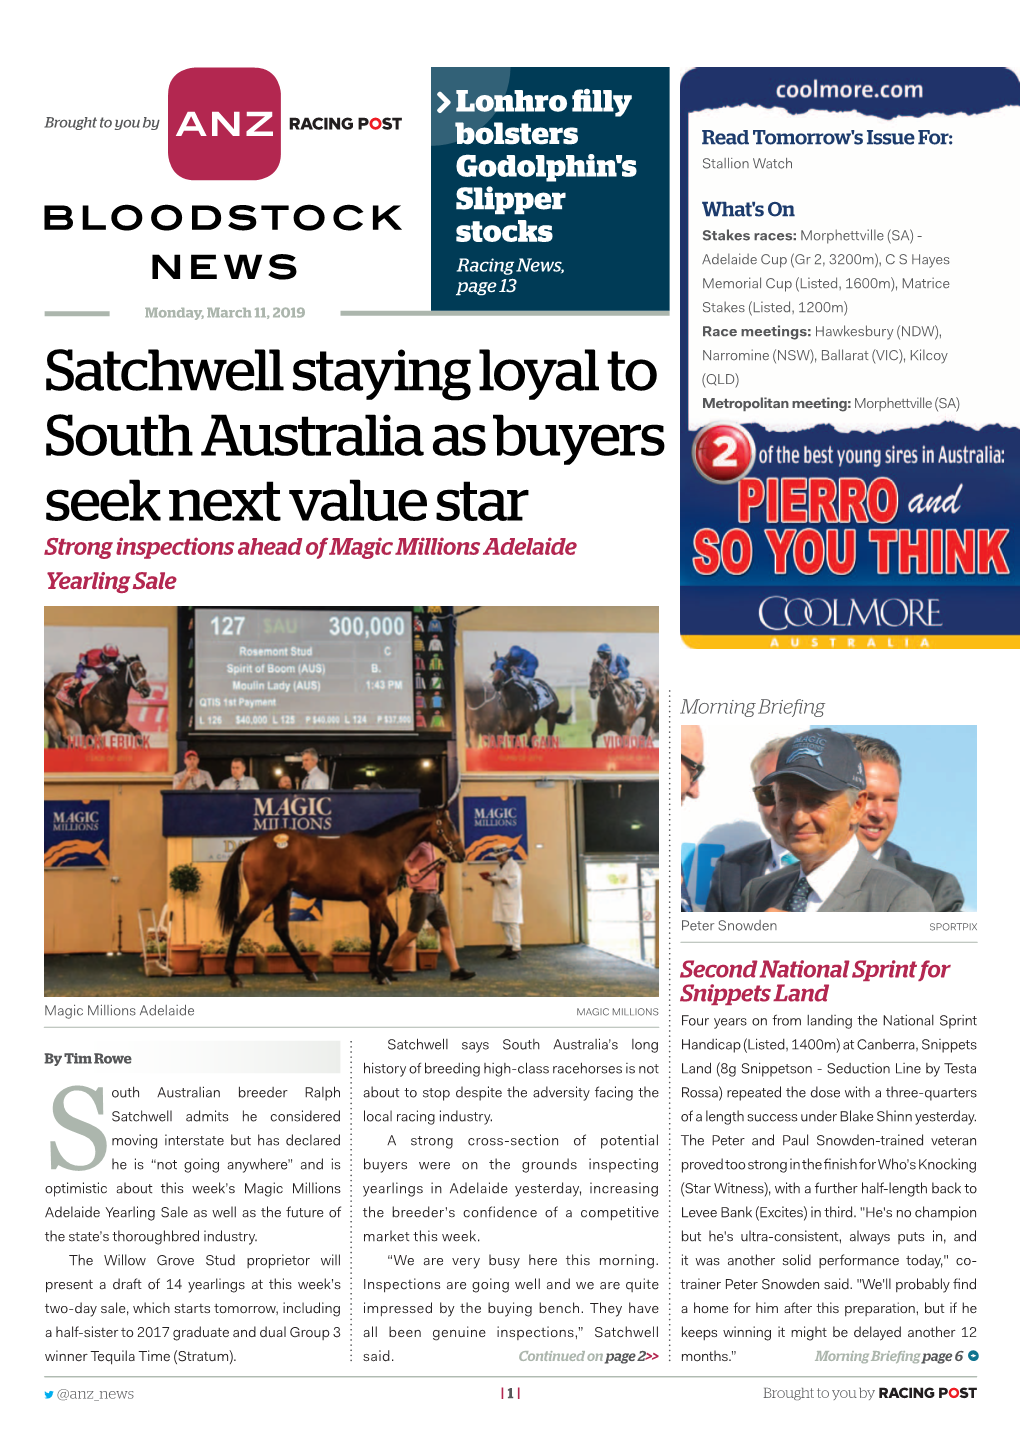 Satchwell Staying Loyal to South Australia As Buyers Seek Next Value Star | 2 | Monday, March 11, 2019